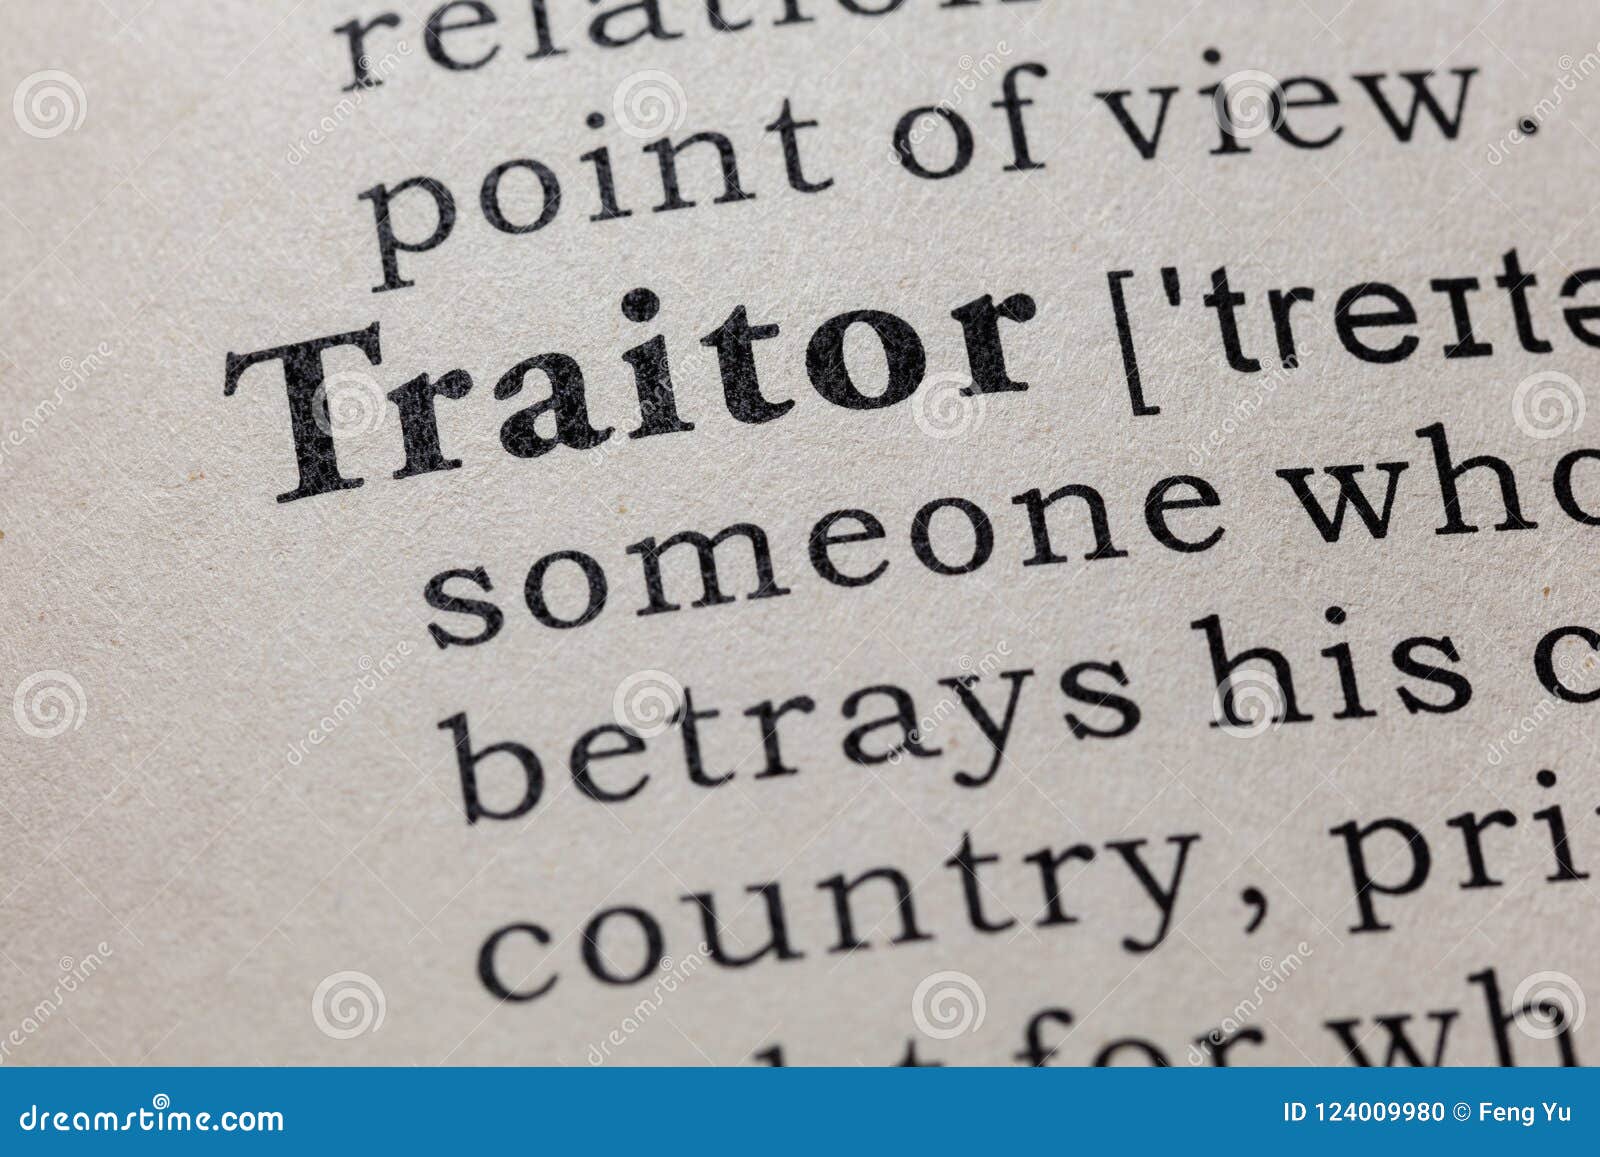 TRAITOR - Meaning and Pronunciation 